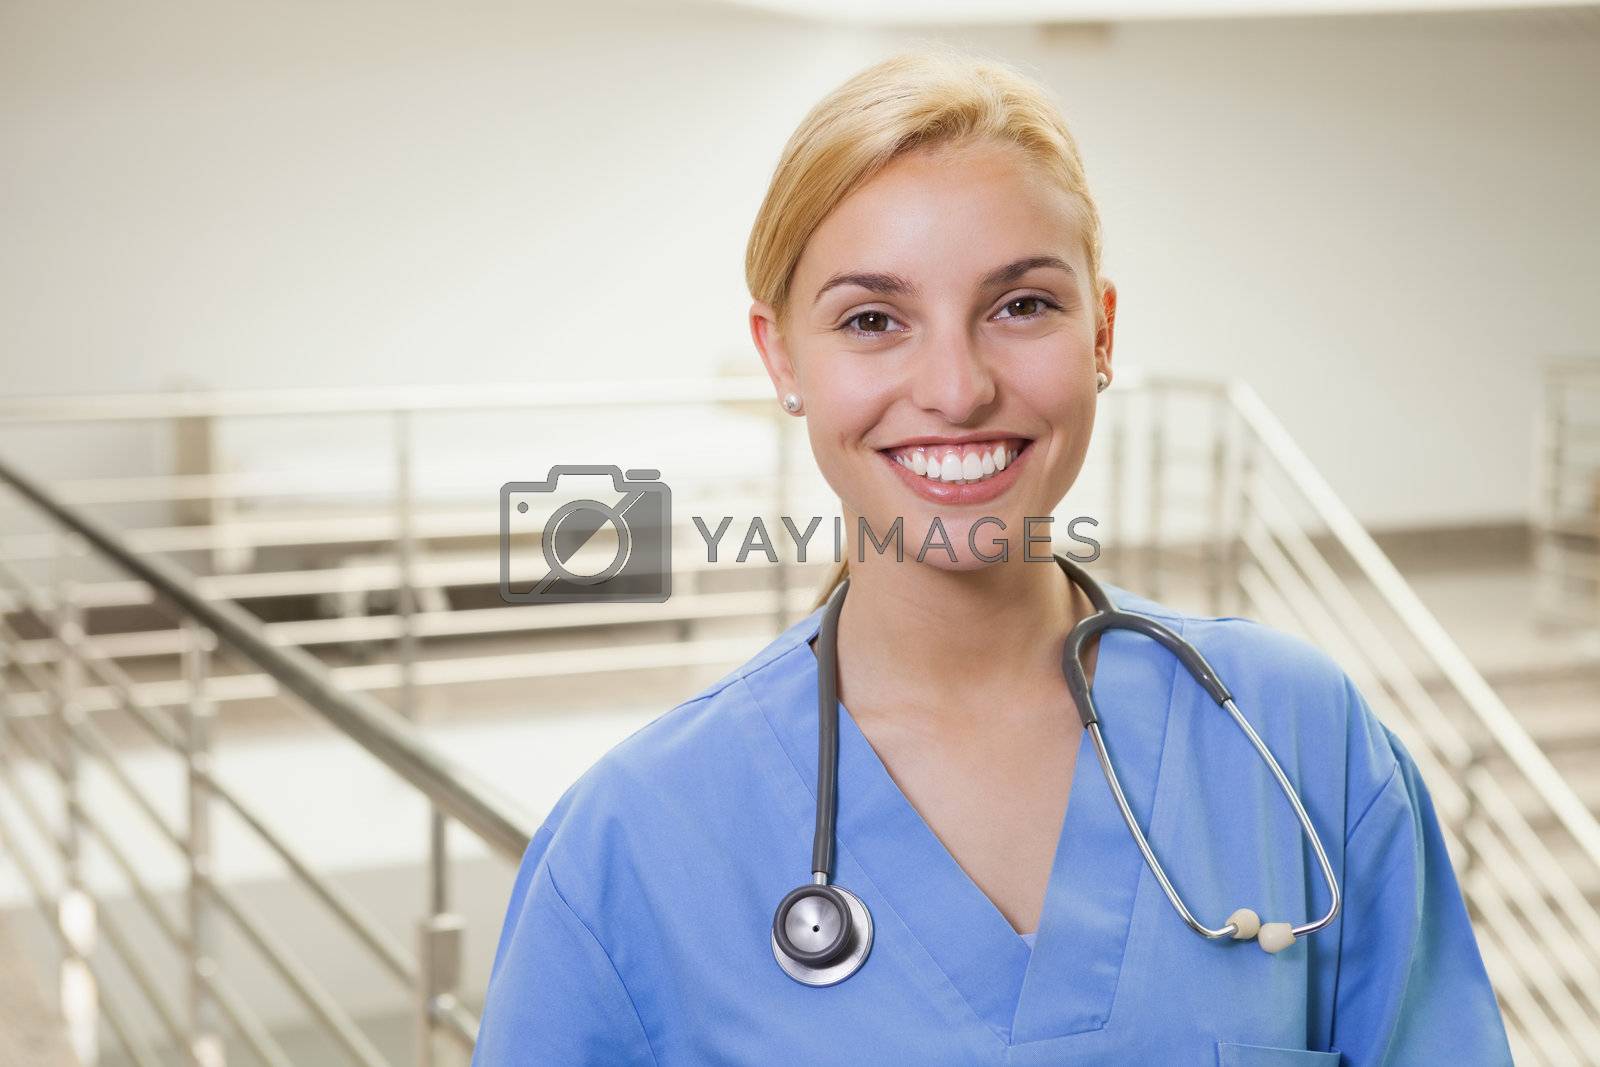 Royalty free image of Nurse in a stairwell smiling by Wavebreakmedia